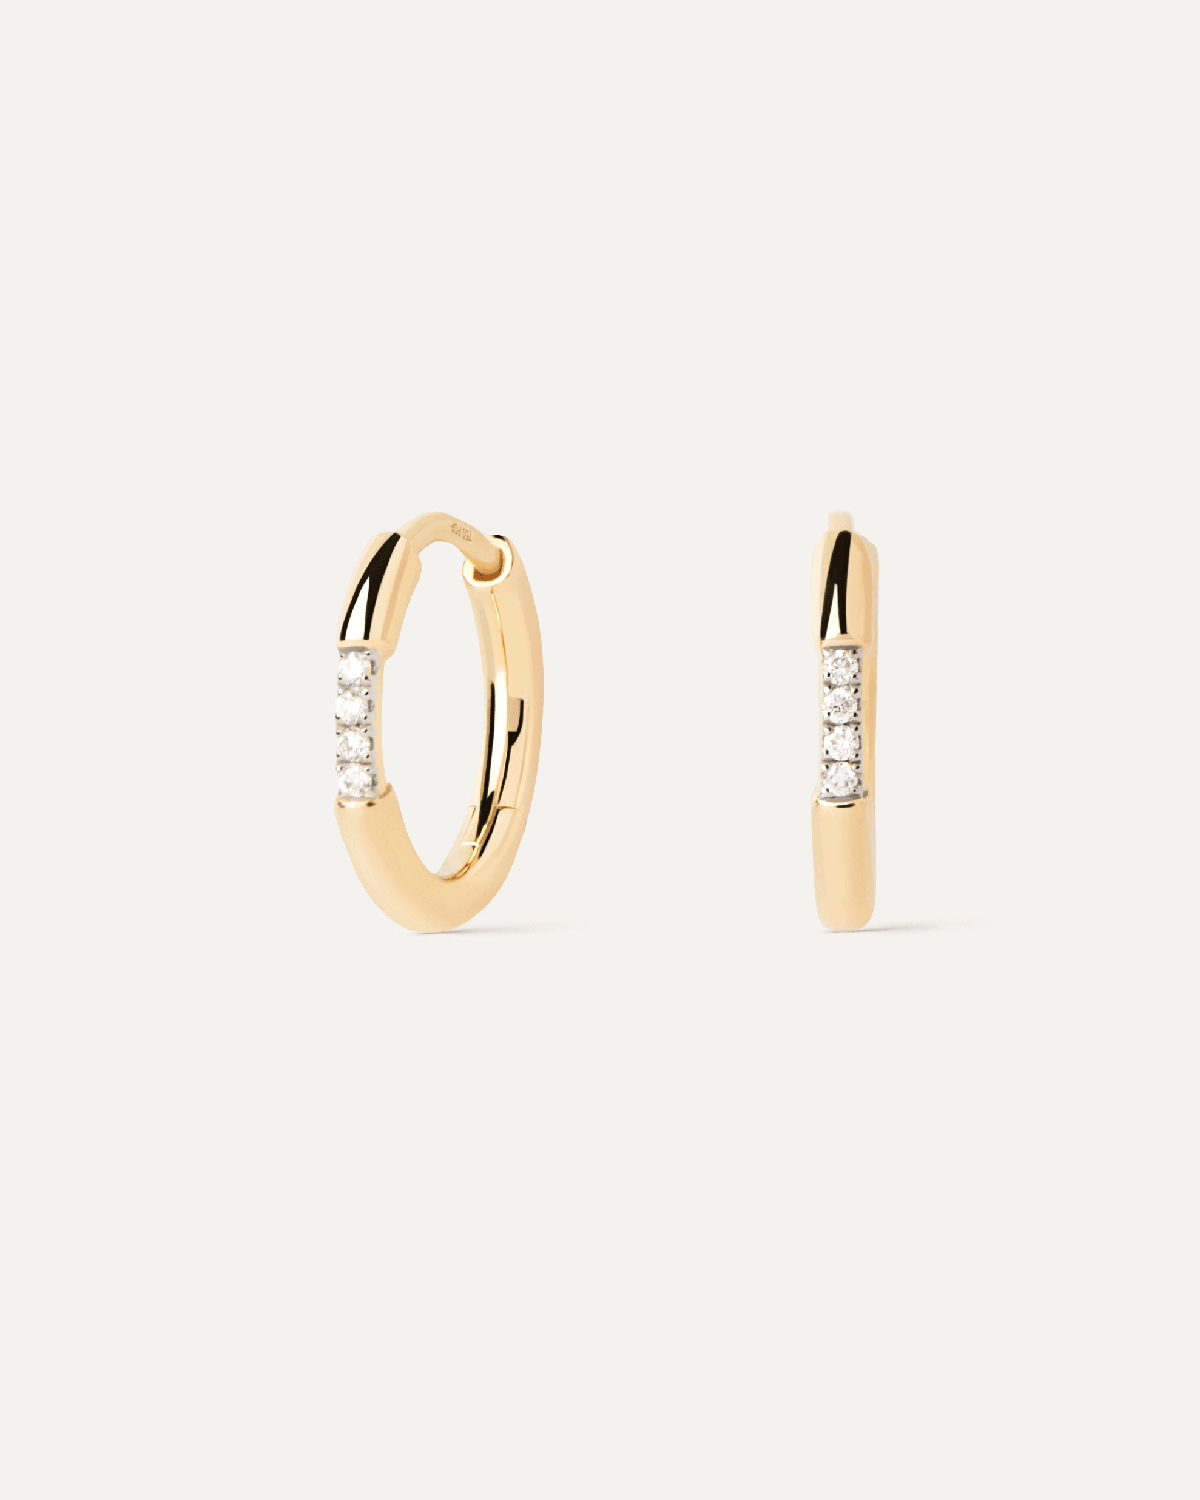 Diamonds and gold Mini Nora hoops. Small huggie earrings in solid yellow gold set with contrasting lab-grown diamonds . Get the latest arrival from PDPAOLA. Place your order safely and get this Best Seller.